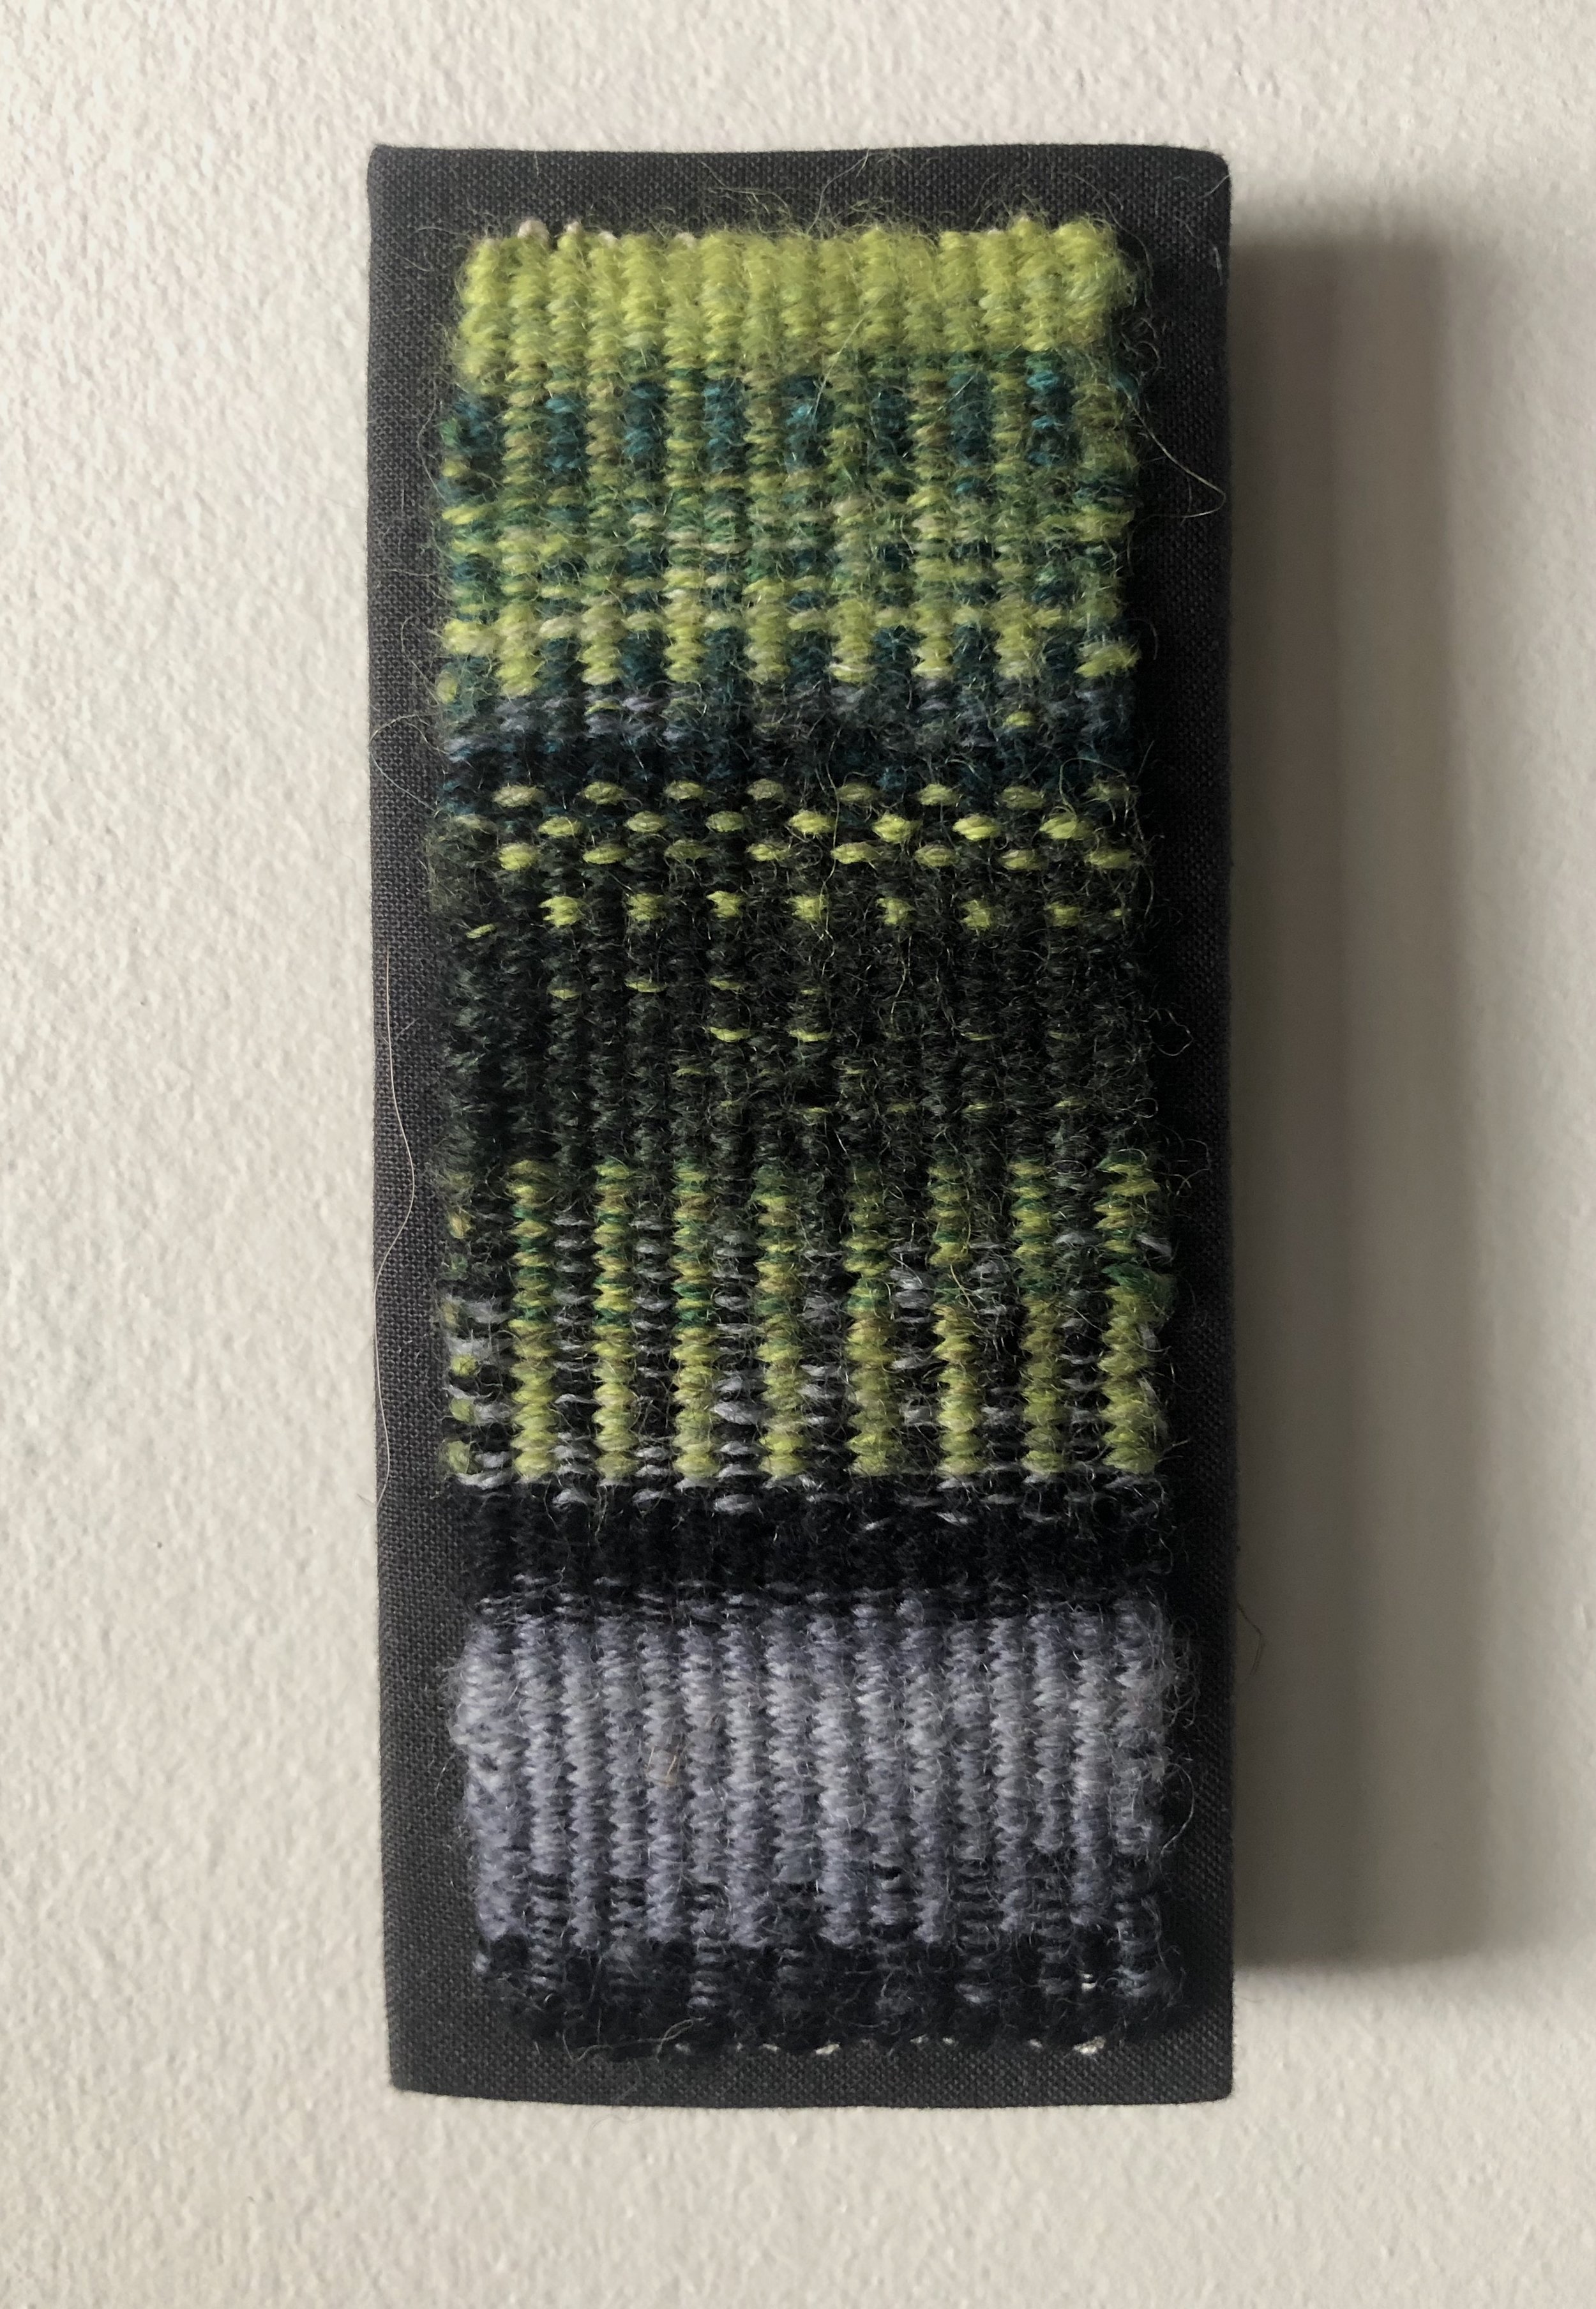   Night Woods , 2019. Cotton warp, wool weft. 2” x 5”. Woven using a four-selvedge tapestry technique. Finalist for the Australian Tapestry Workshop’s 2019 Irene Davies Emerging Artist Award. 